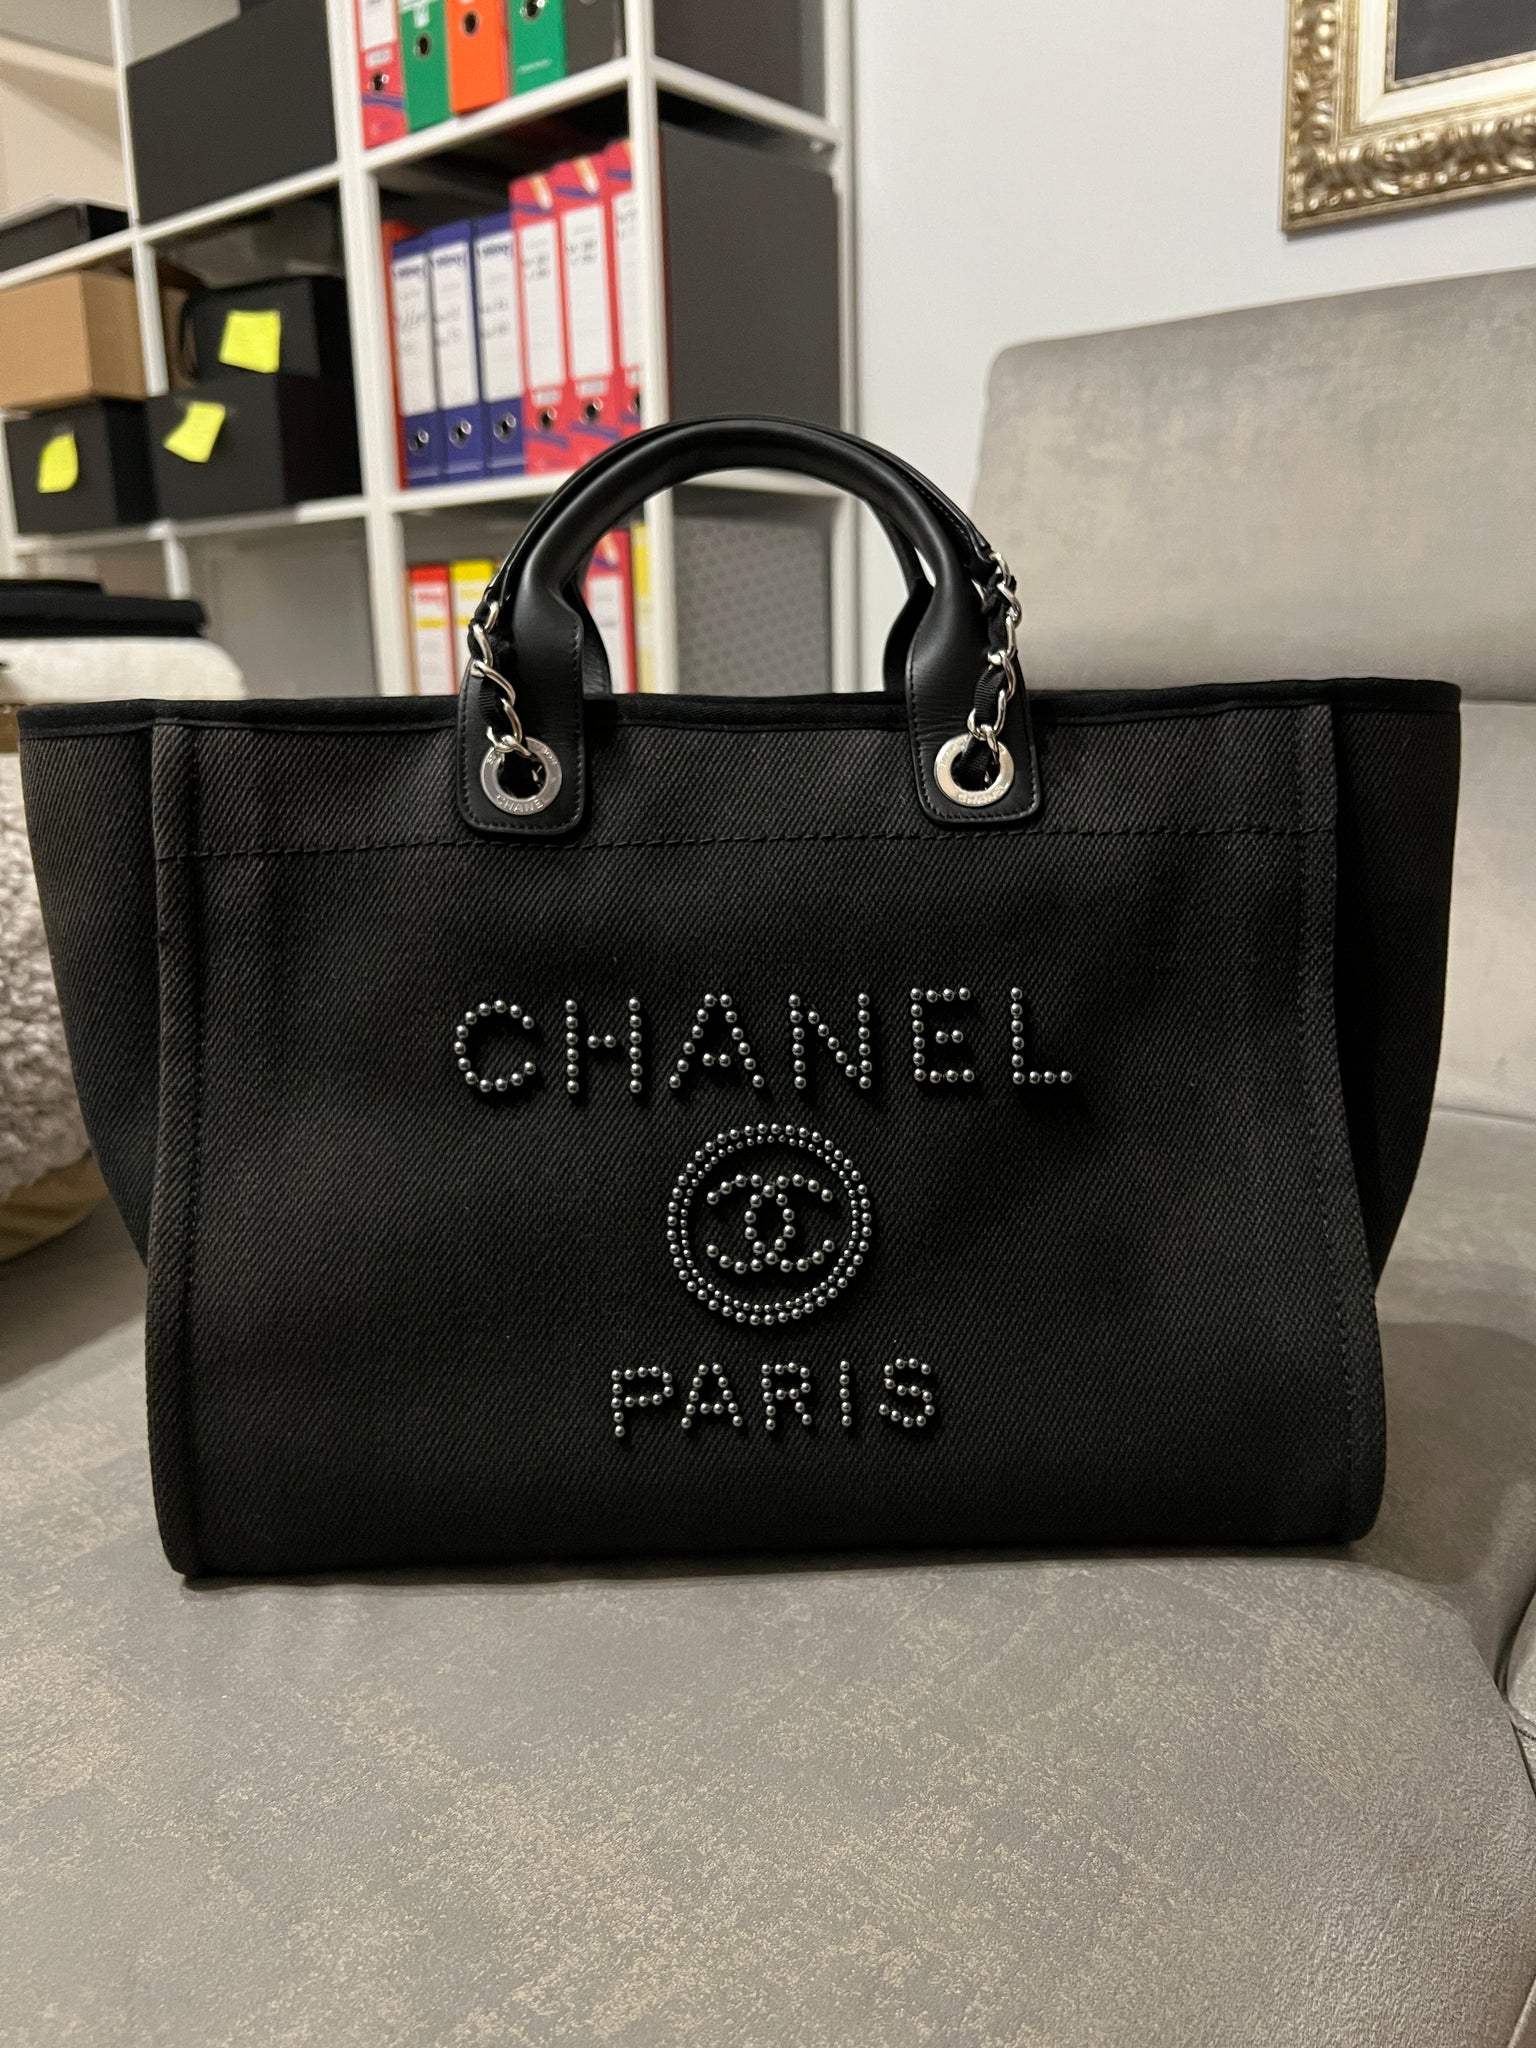 grey chanel deauville tote bag